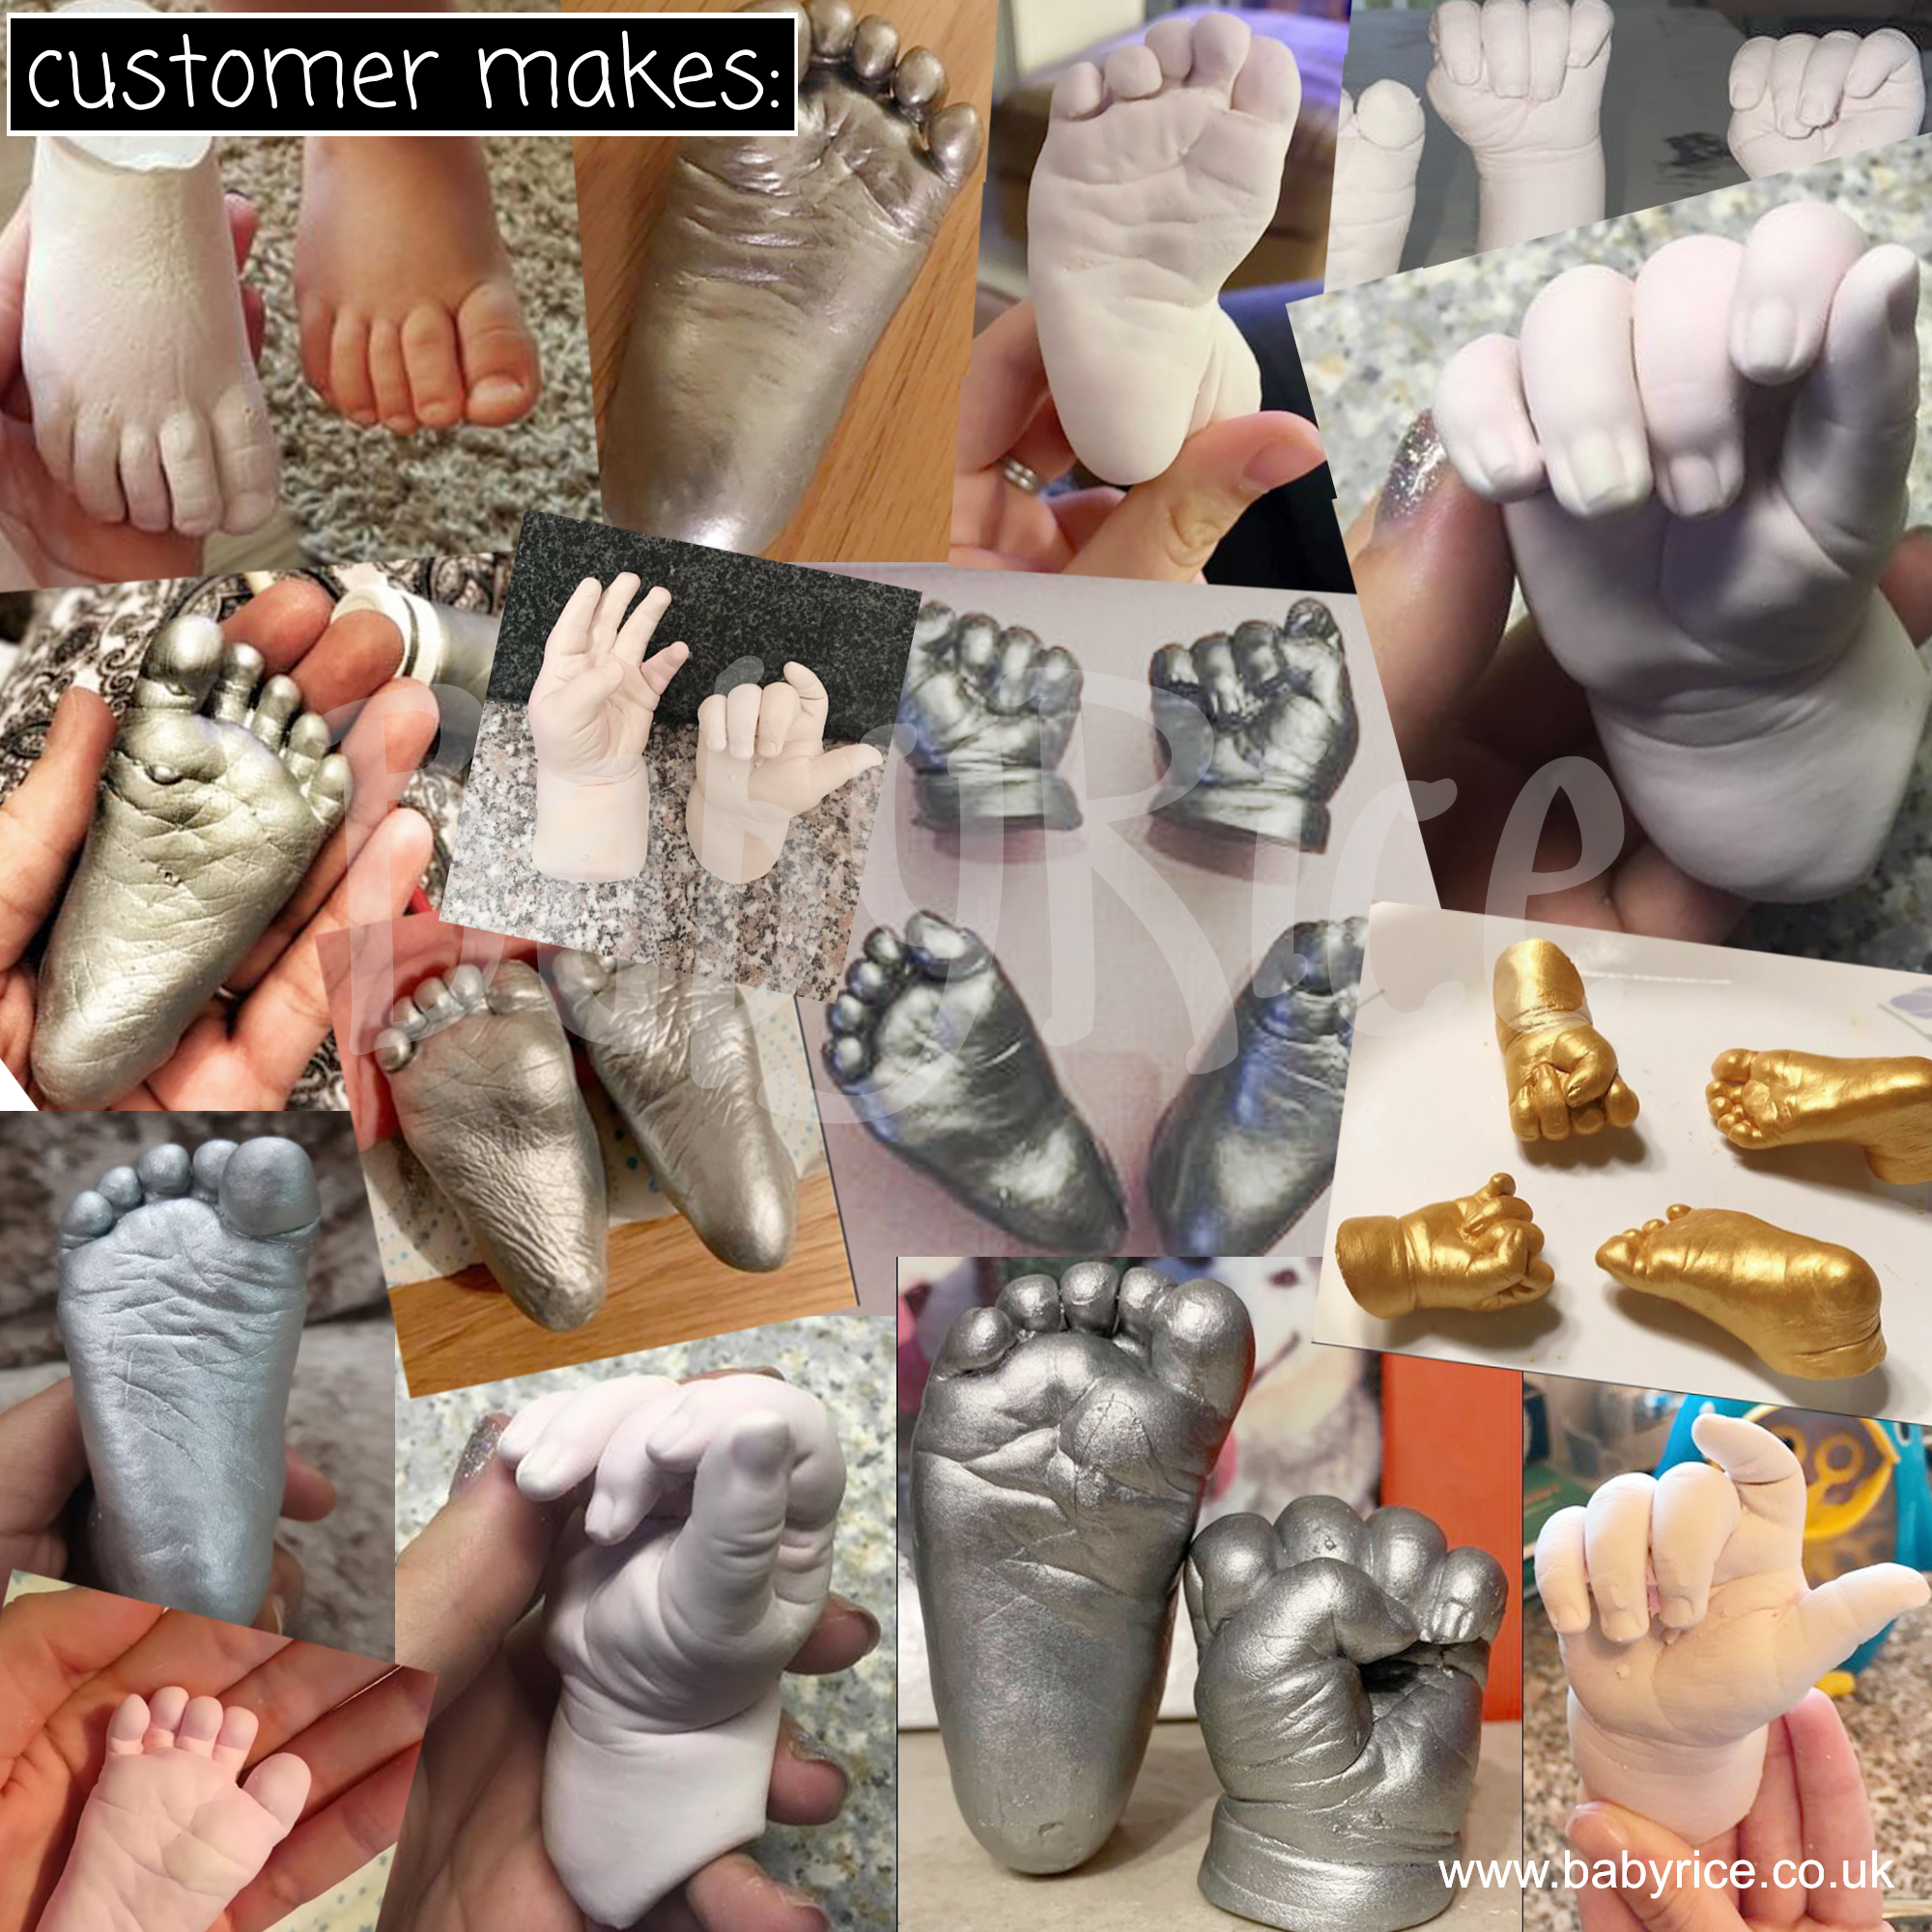 How to customer gallery what customers have made with our baby casting kits hand & foot photos